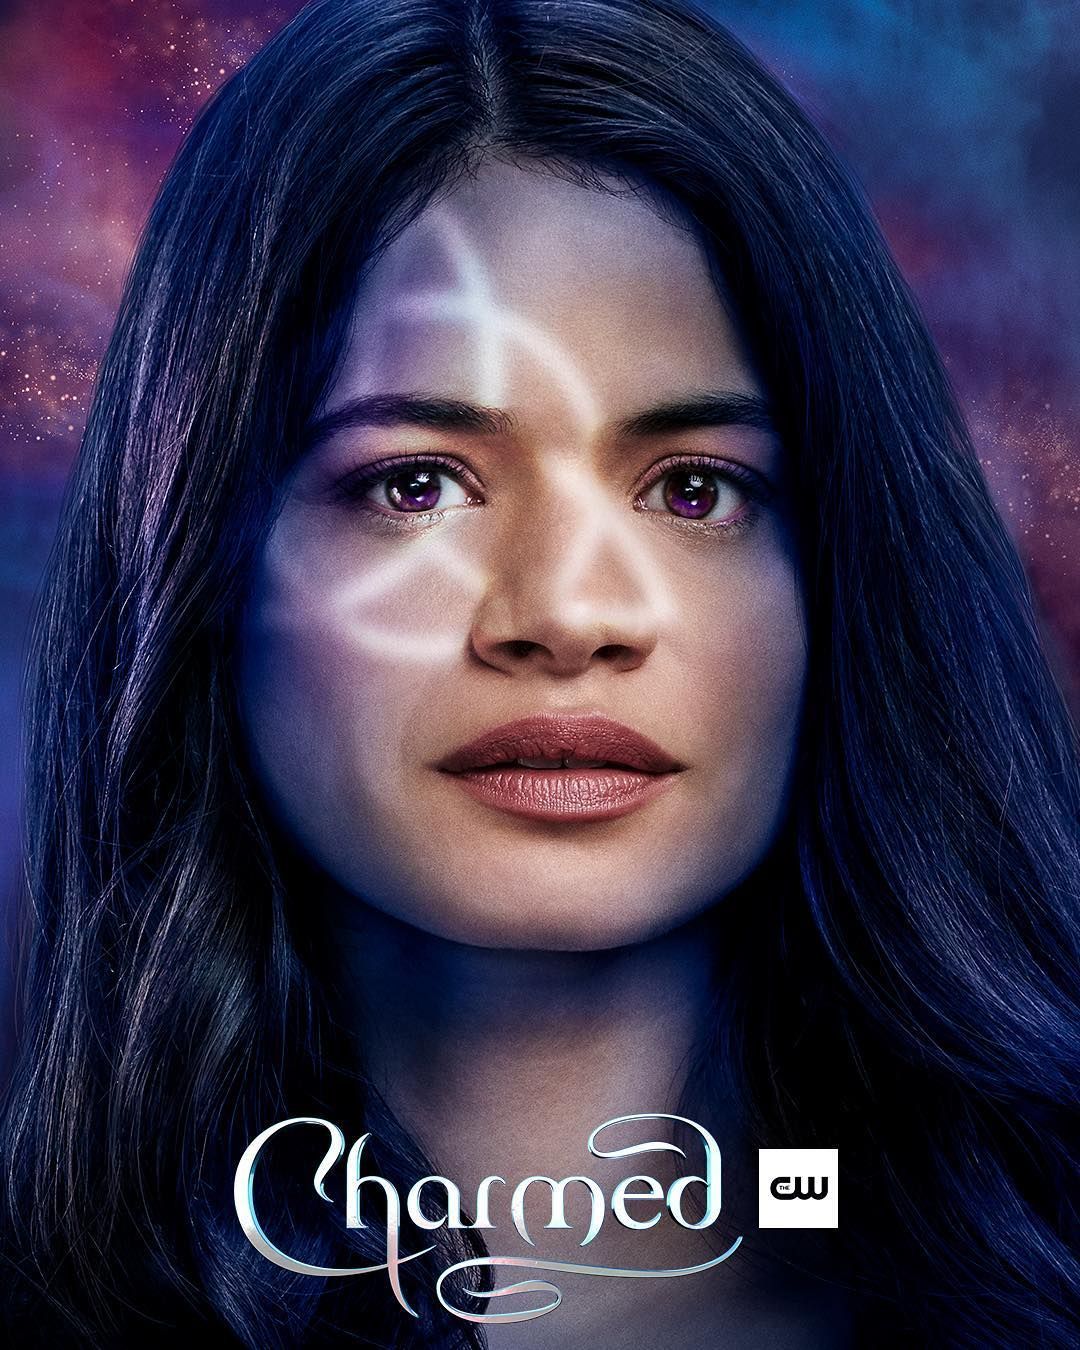 Charmed the tv show ( remake 2019) ideas. charmed tv show, charmed tv, charmed